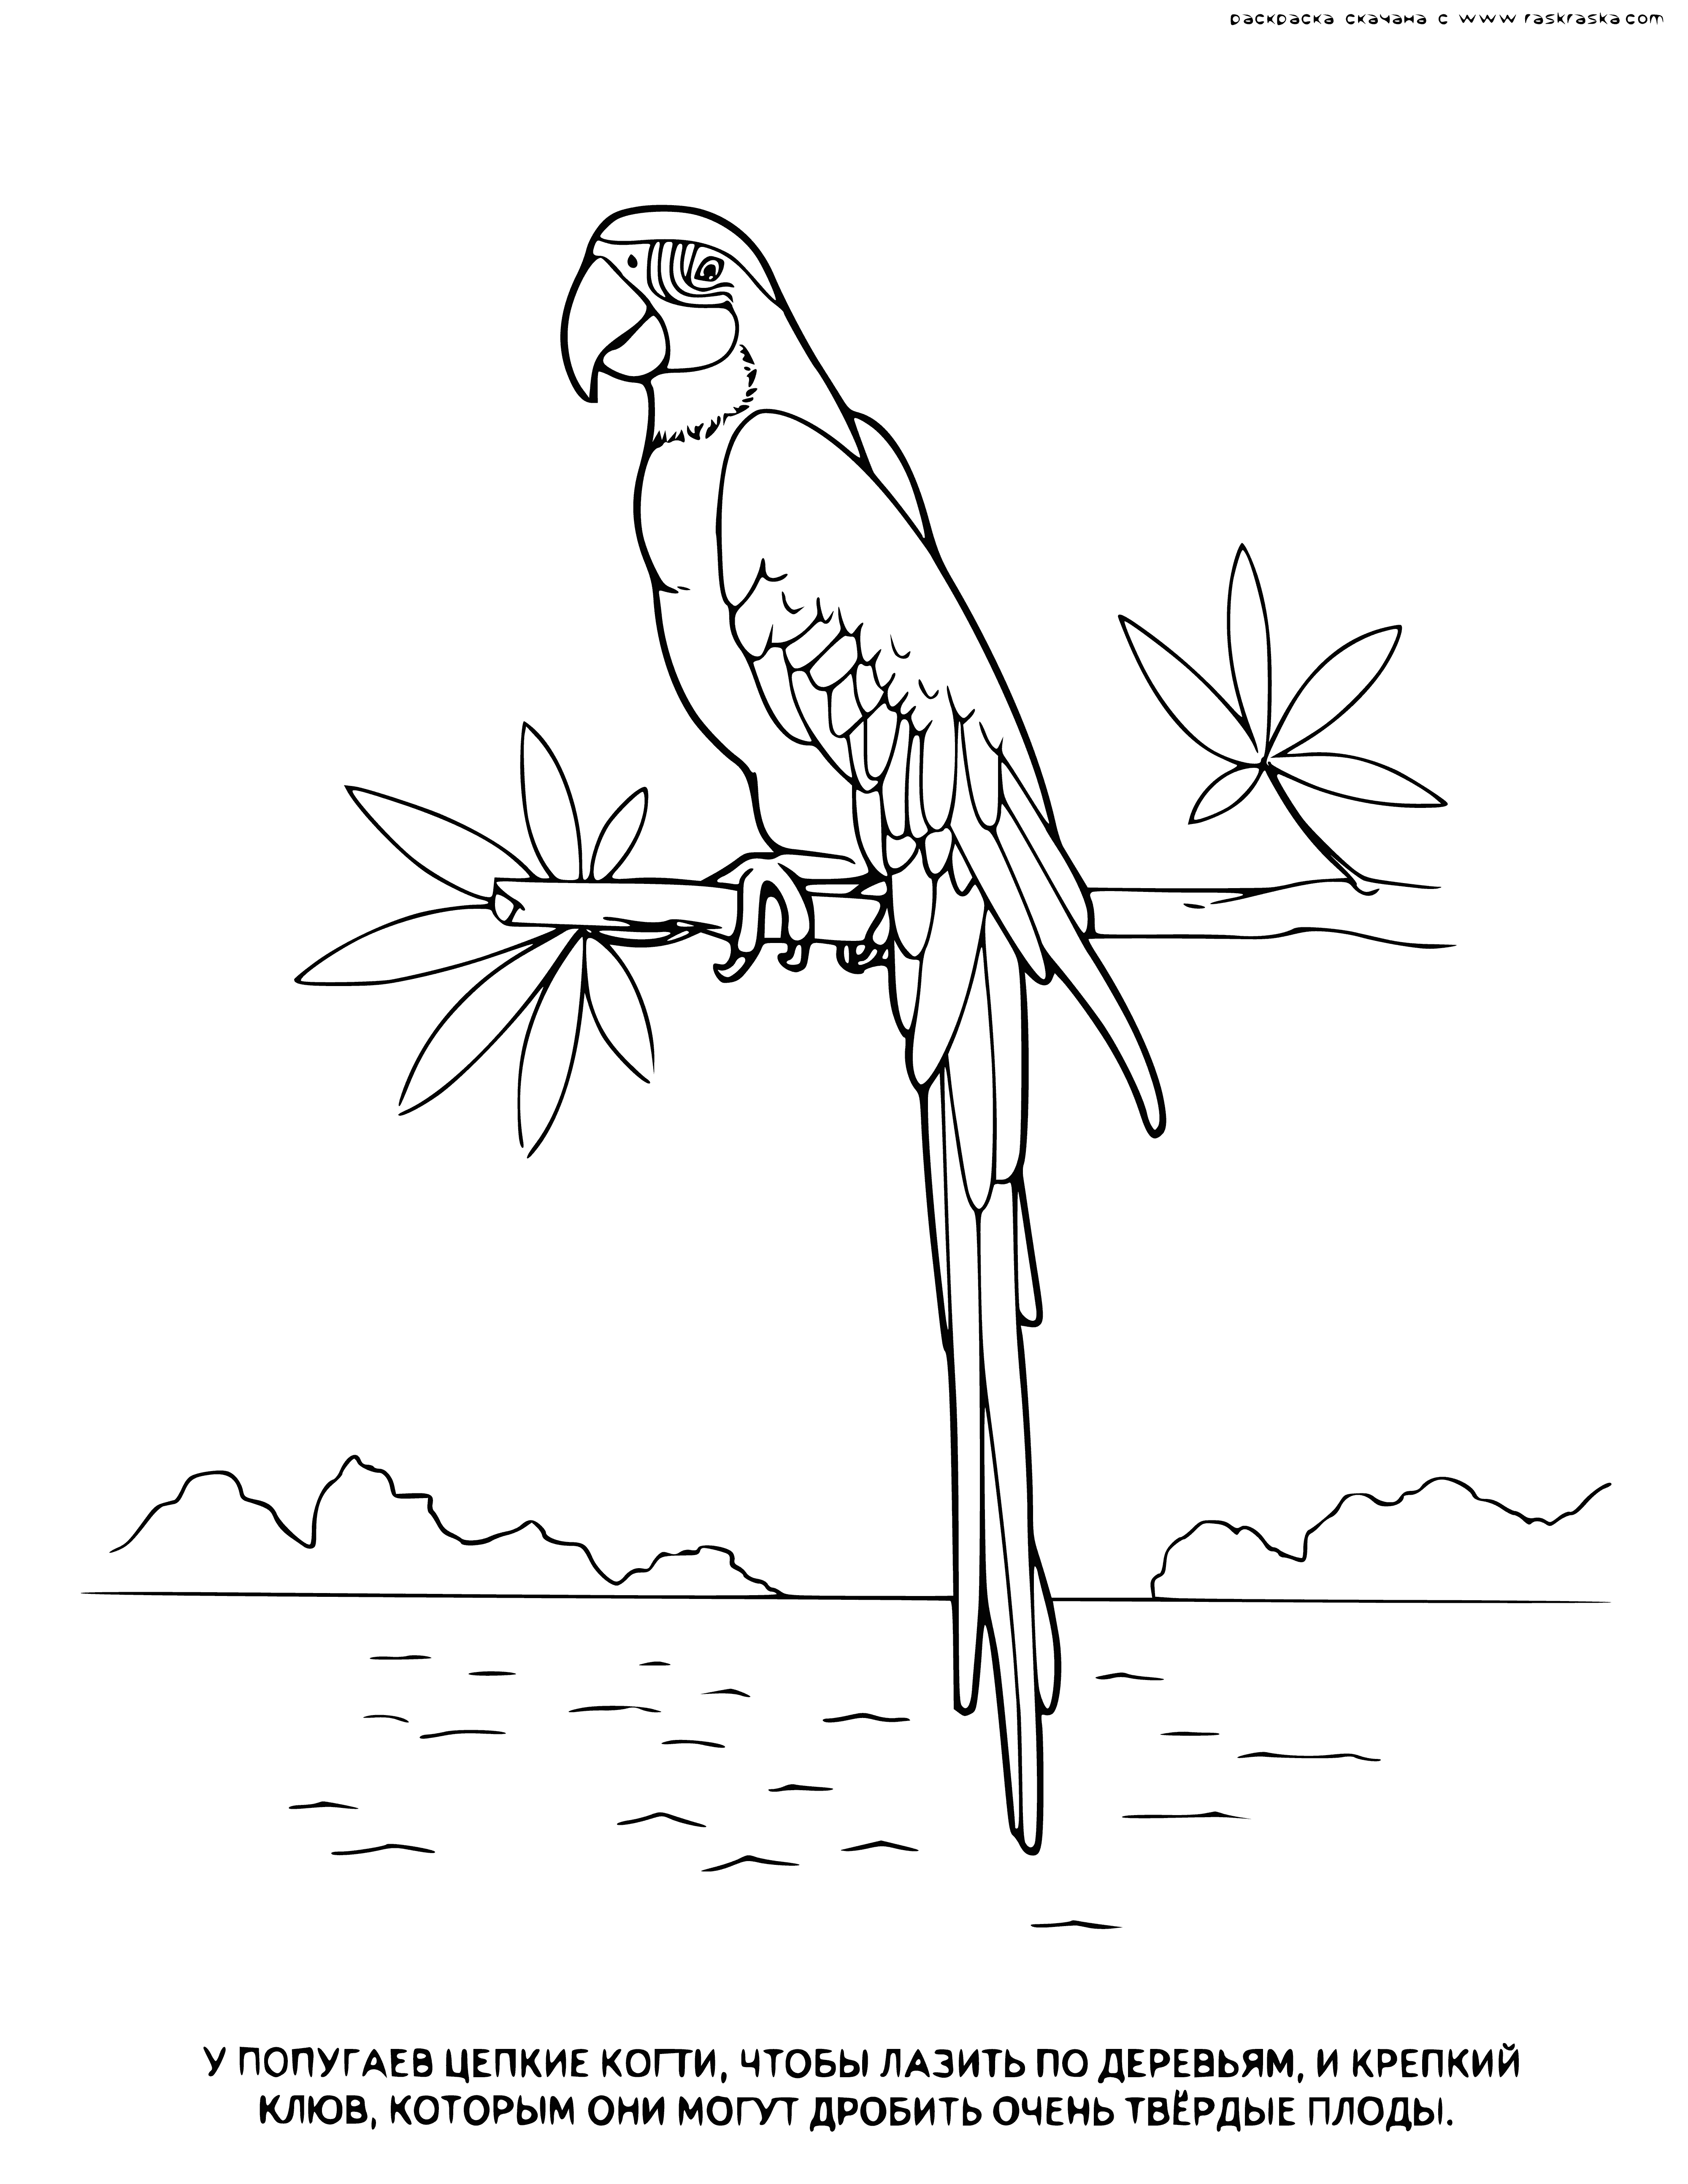 coloring page: Ara parrots have green bodies with yellow tummies, red beaks, and red and blue/green wings. #parrotsofinstagram